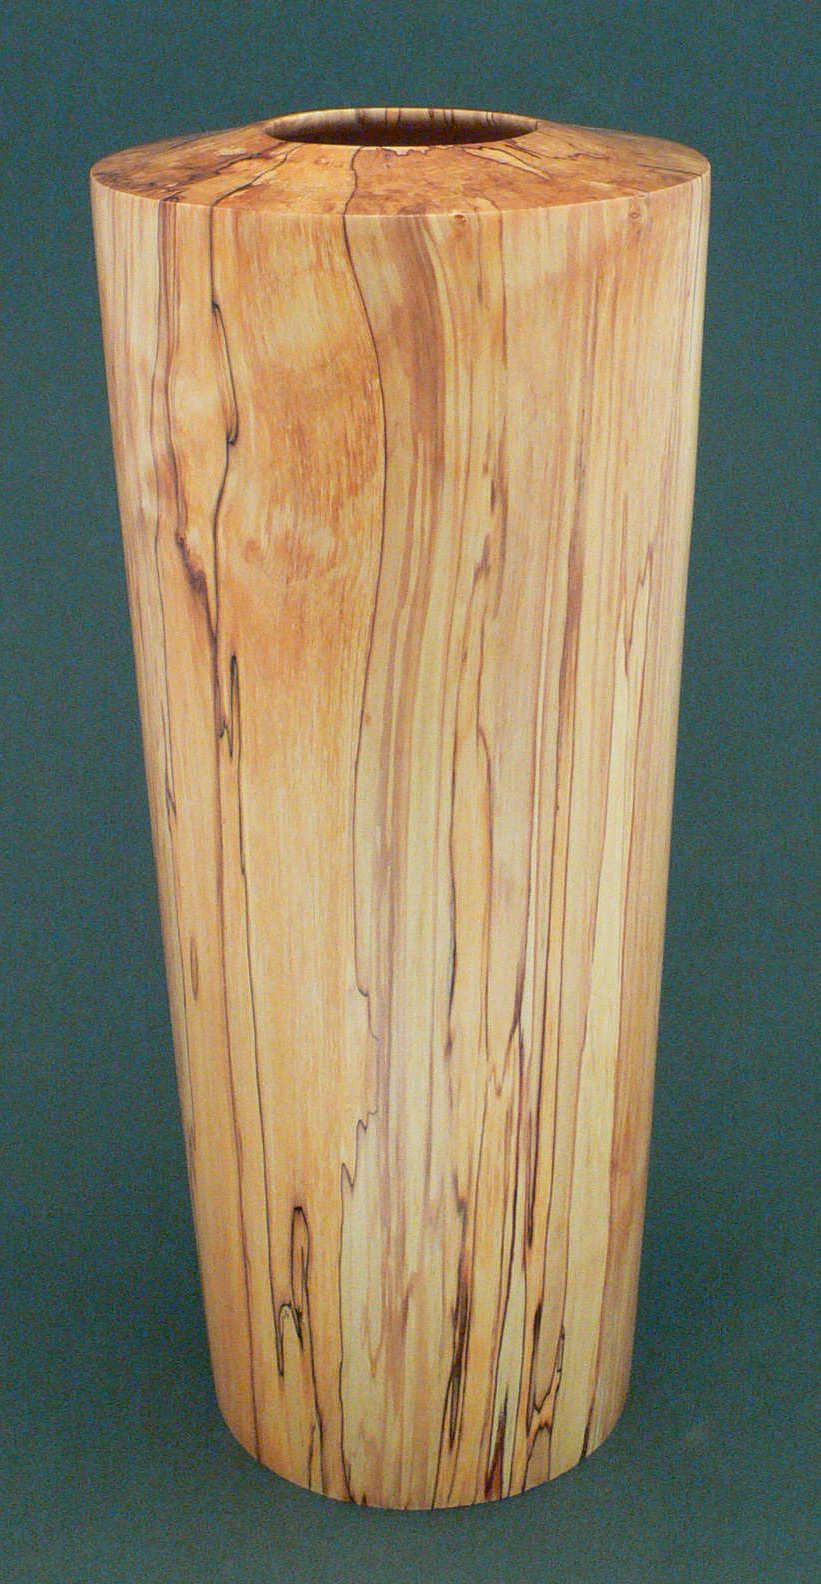 Image showing an example of a spalted Beech hollow form vessel